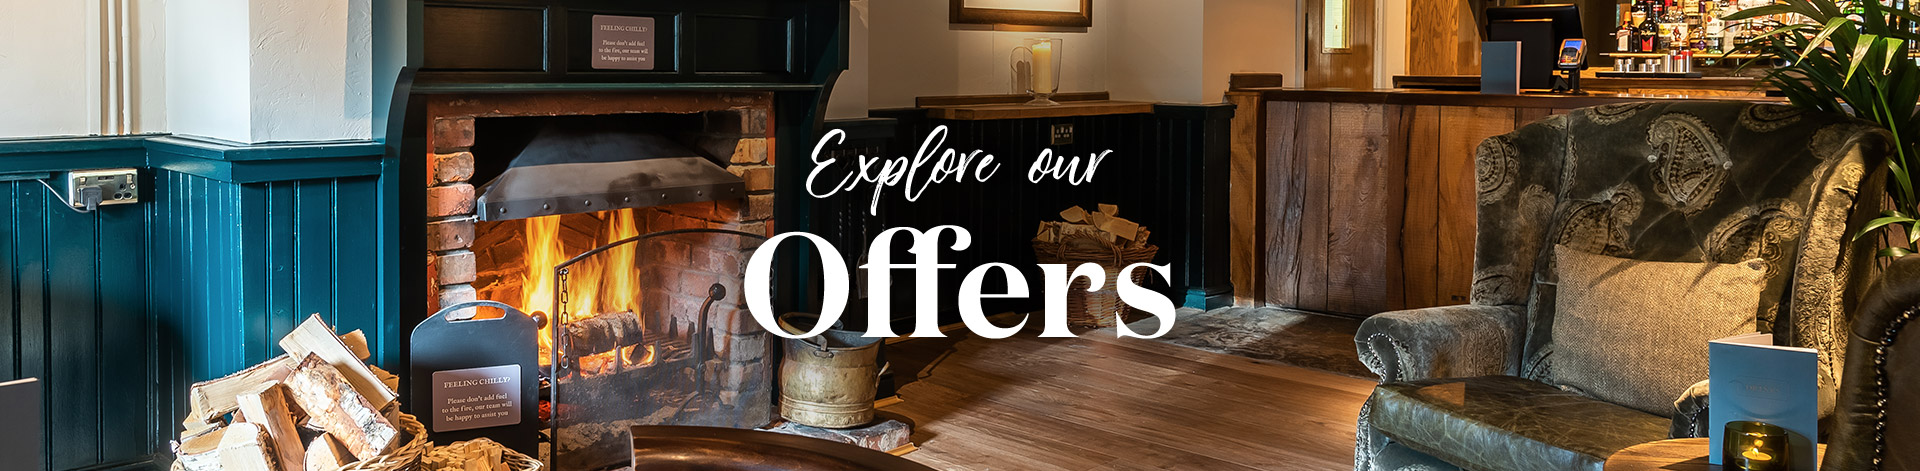 Our latest offers at The Badger's Sett